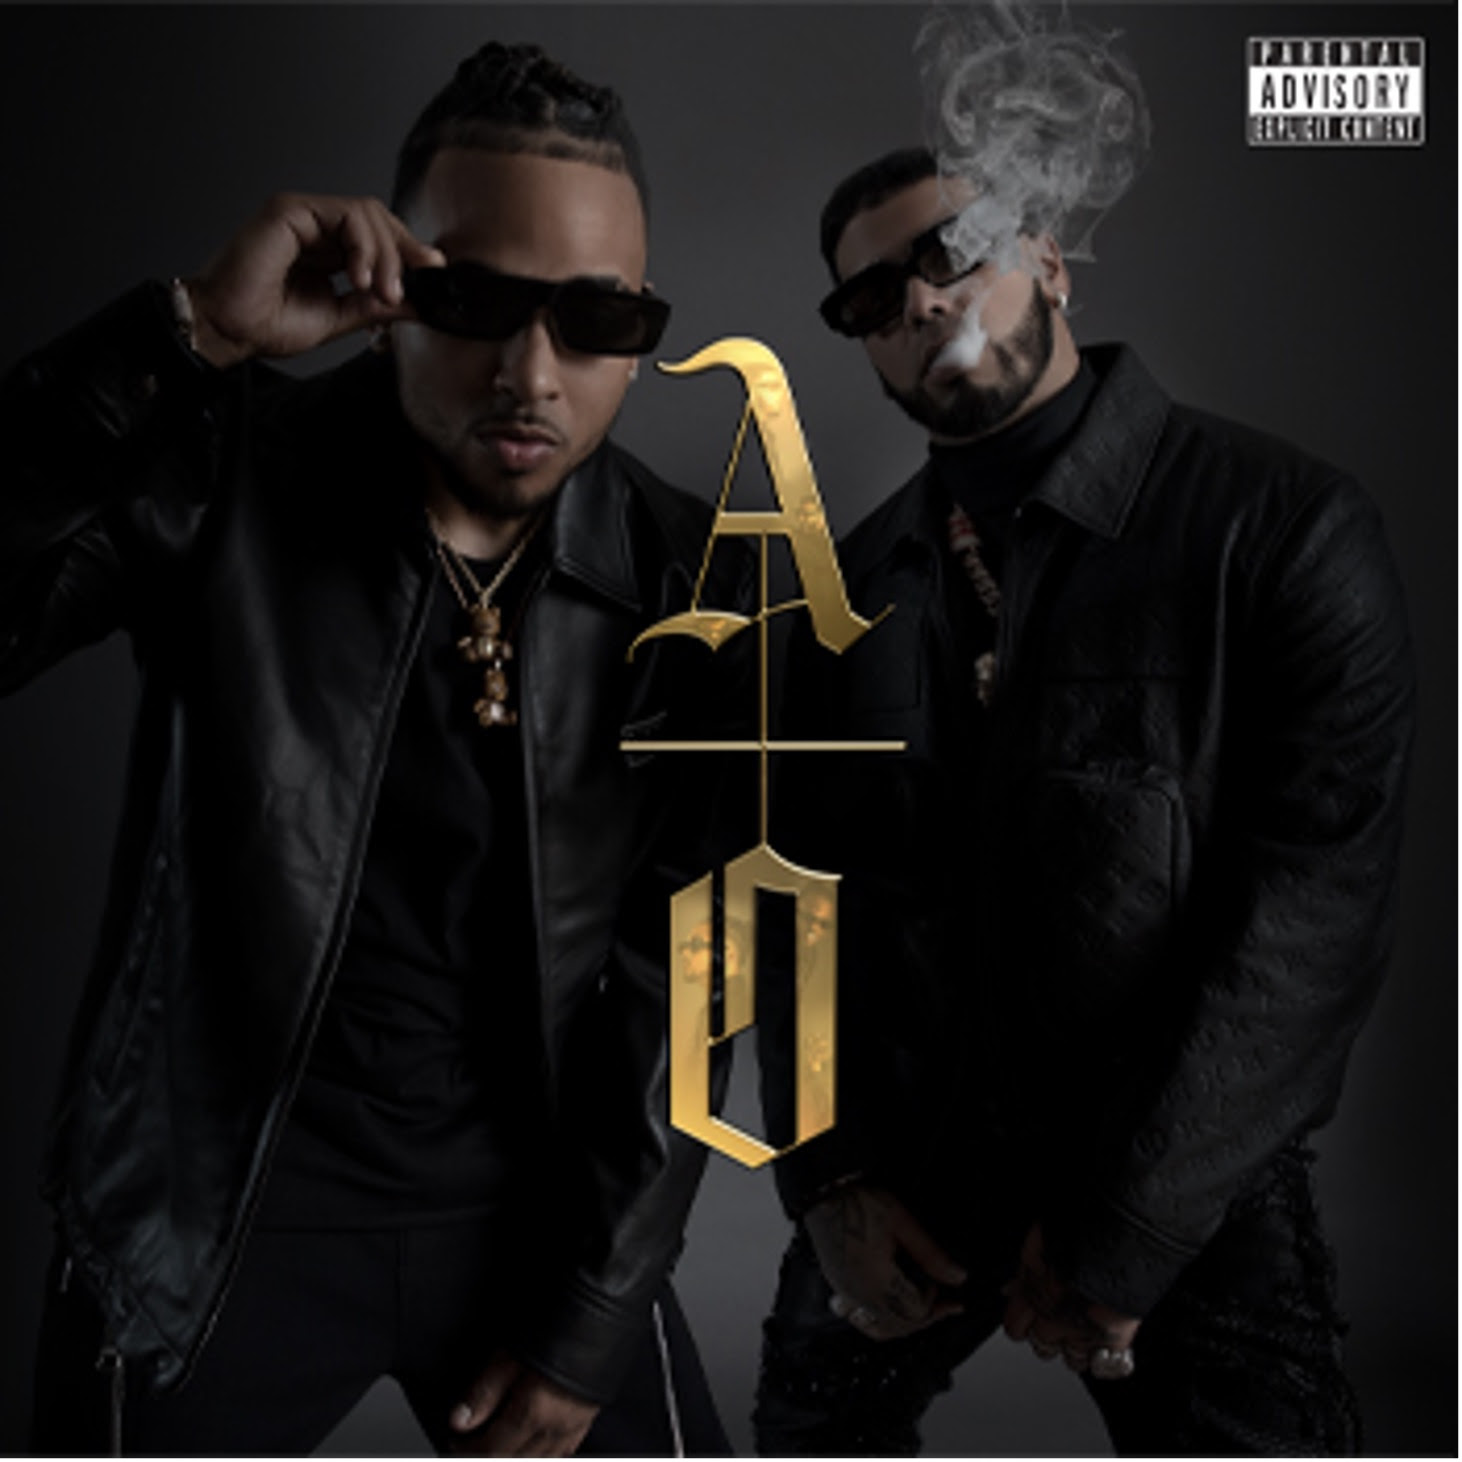 SOURCE LATINO: Anuel AA and Ozuna’s ‘LOS DIOSES’ Is Top Latin Album in The U.S.